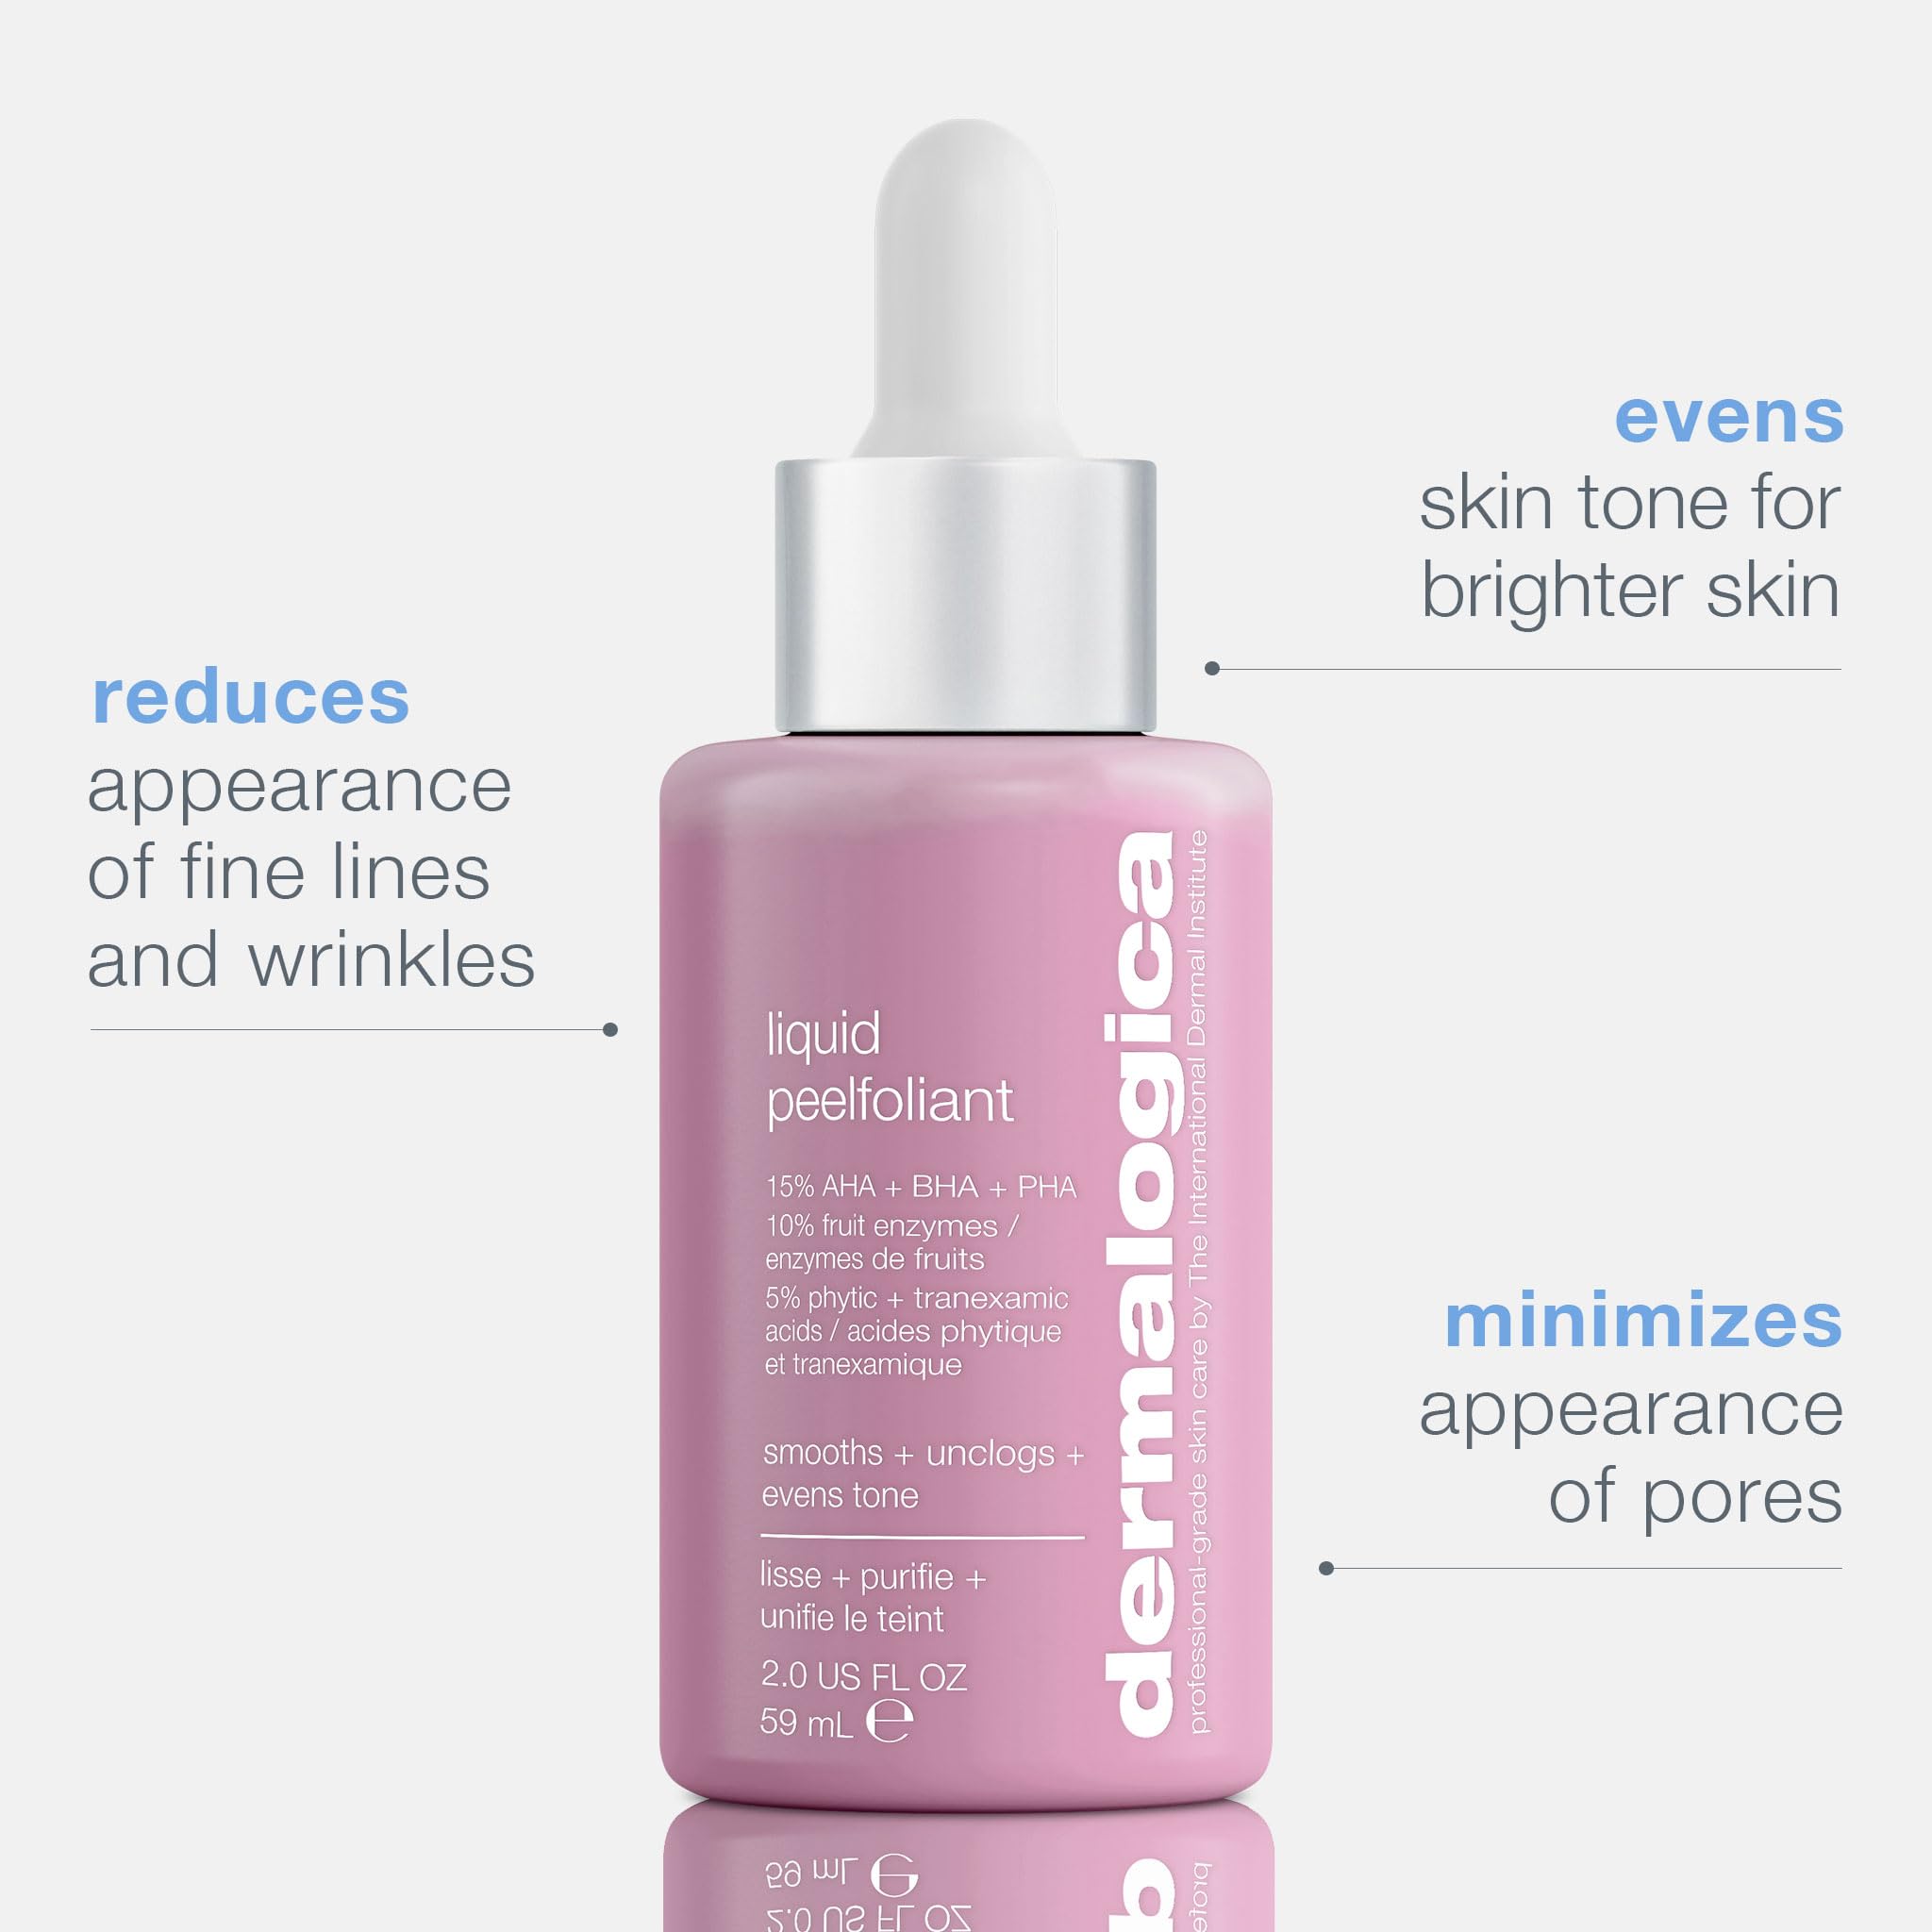 Dermalogica Liquid Peelfoliant with Glycolic Acid, Face Exfoliator Peel with AHA BHA PHA, Smooths Fine Lines and Wrinkles, Unclogs Pores, and Improve Skin Tone - 2 fl oz